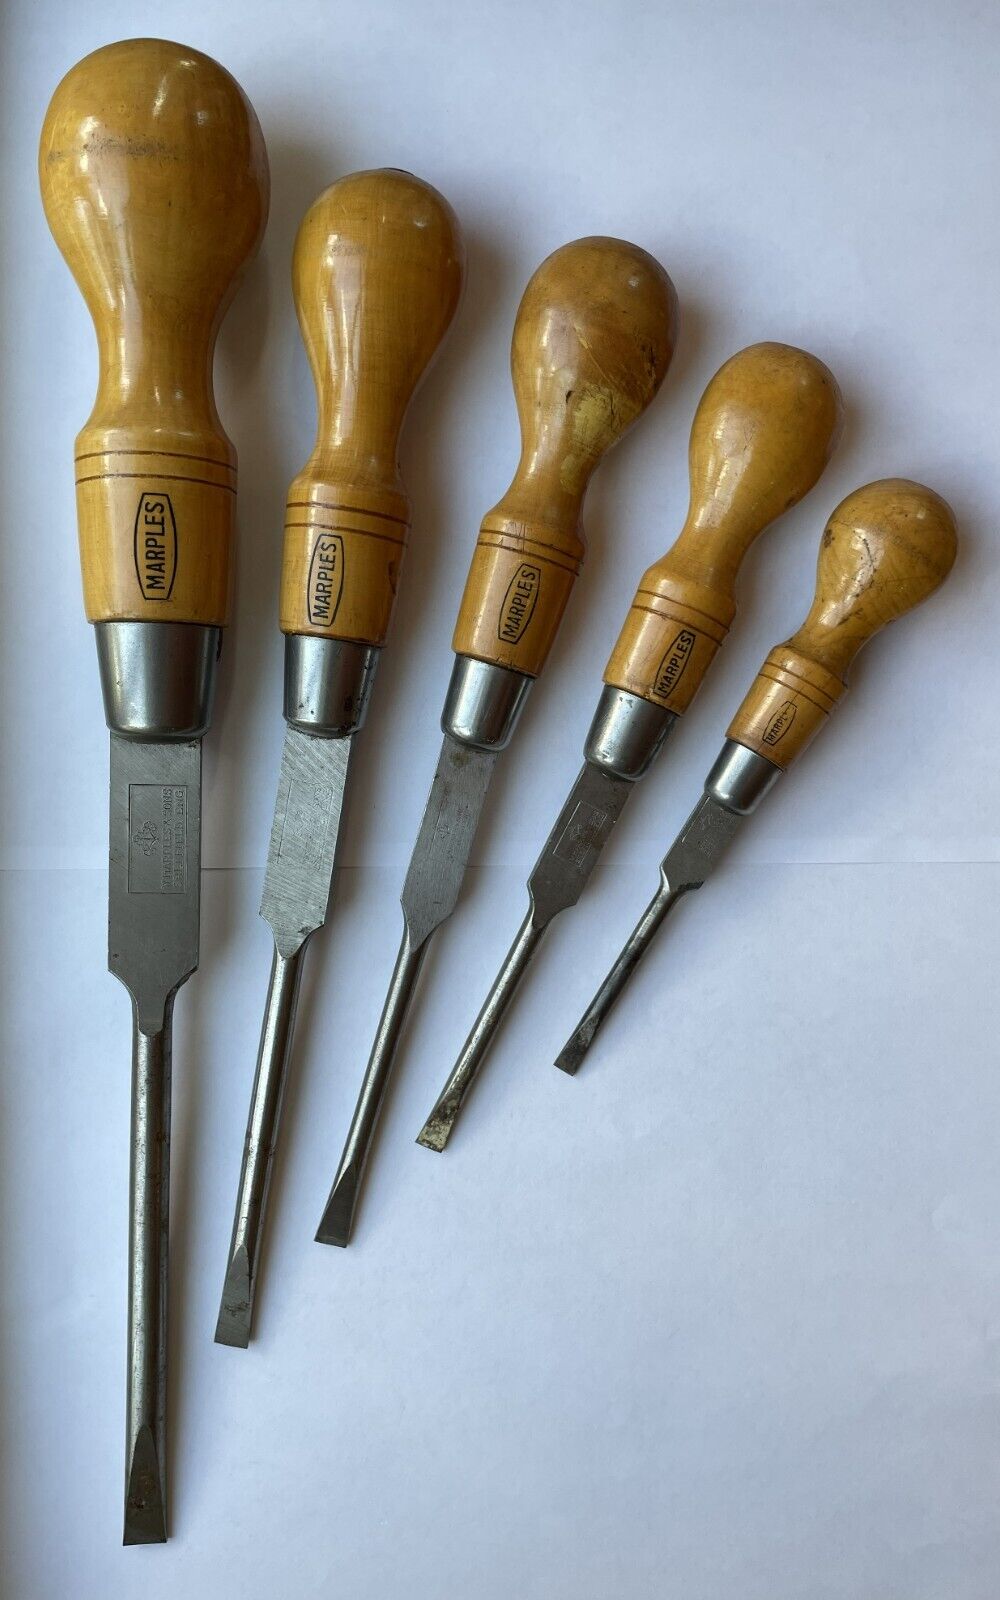 Graduated Set of W. Marples Cabinetmaker Screwdrivers with Boxwood Handles 